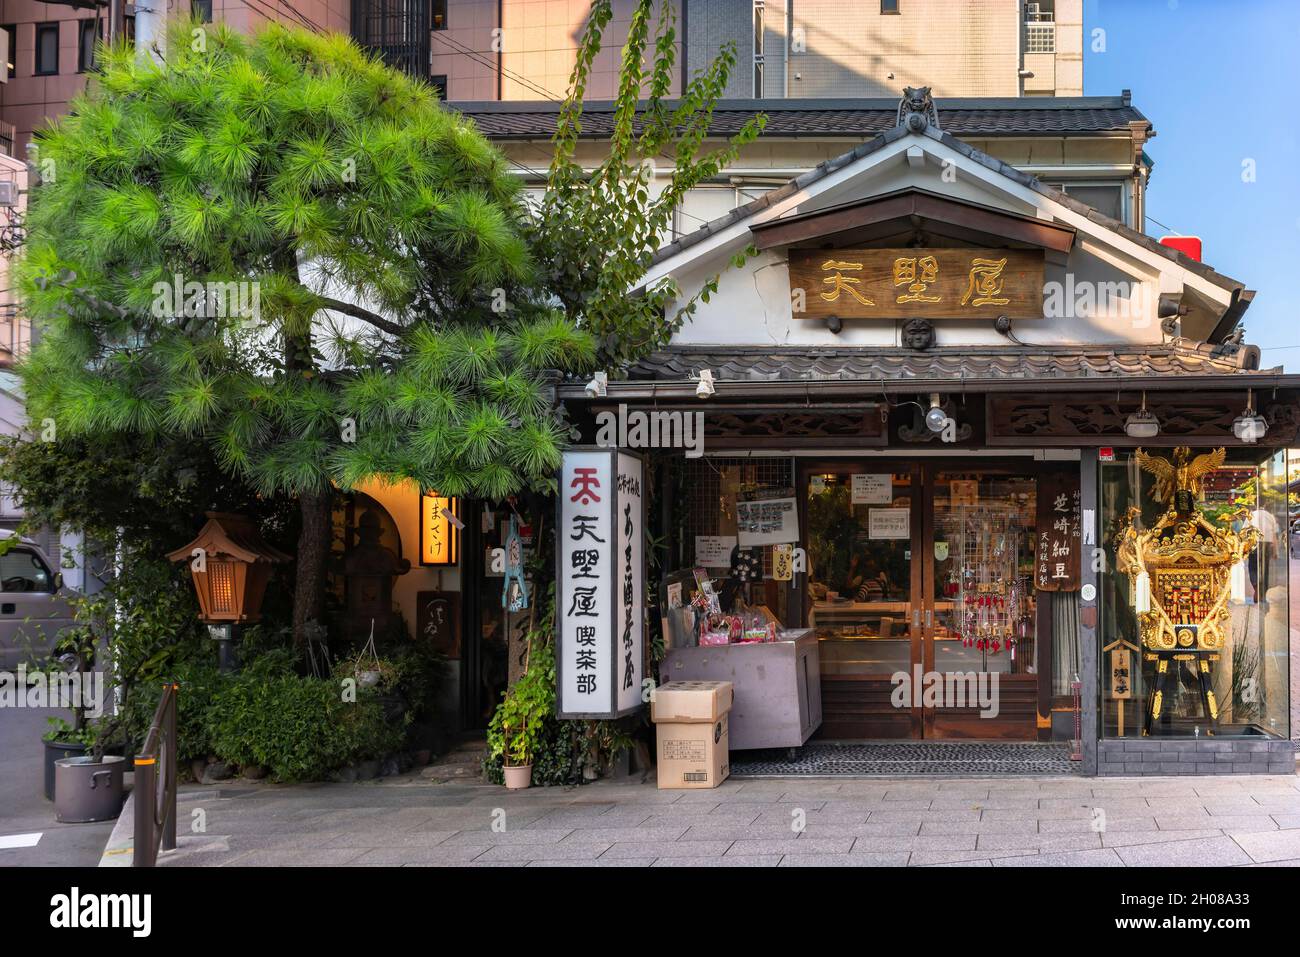 tokyo, japan - september 17 2019: Amanoya Cafe at Kanda-myōjin famous for Amazake fermented rice drink with a traditional architecture adorned with ra Stock Photo